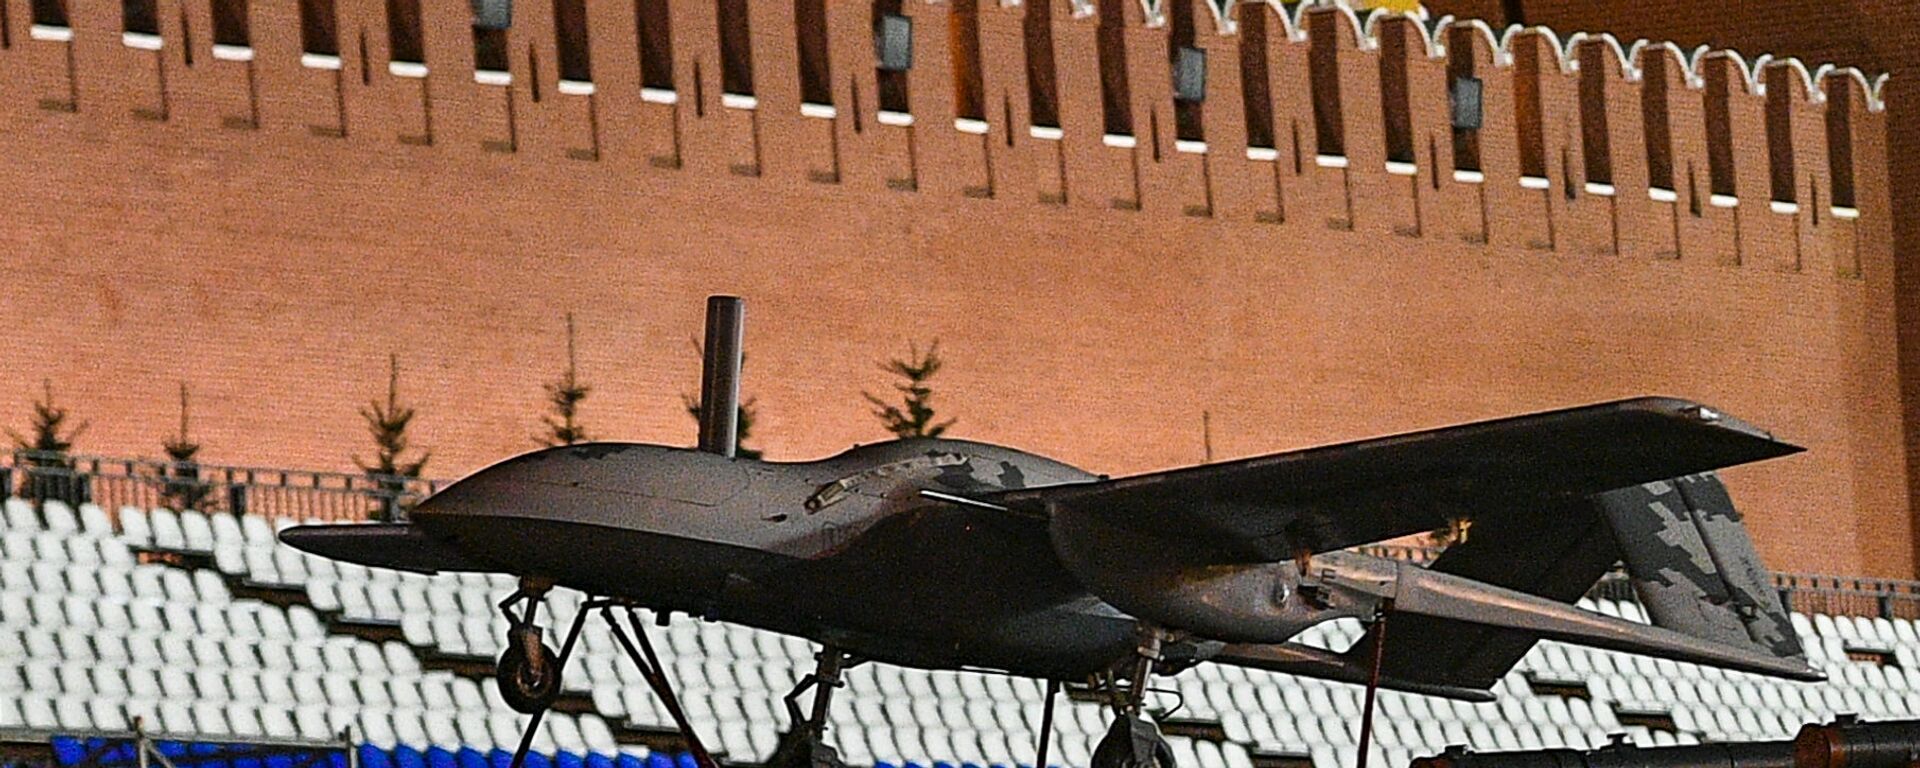 Russia's Korsar Drone Flight Model during Russian army rehearsals for 9 May 2019 Victory Day military parade - Sputnik International, 1920, 20.10.2022